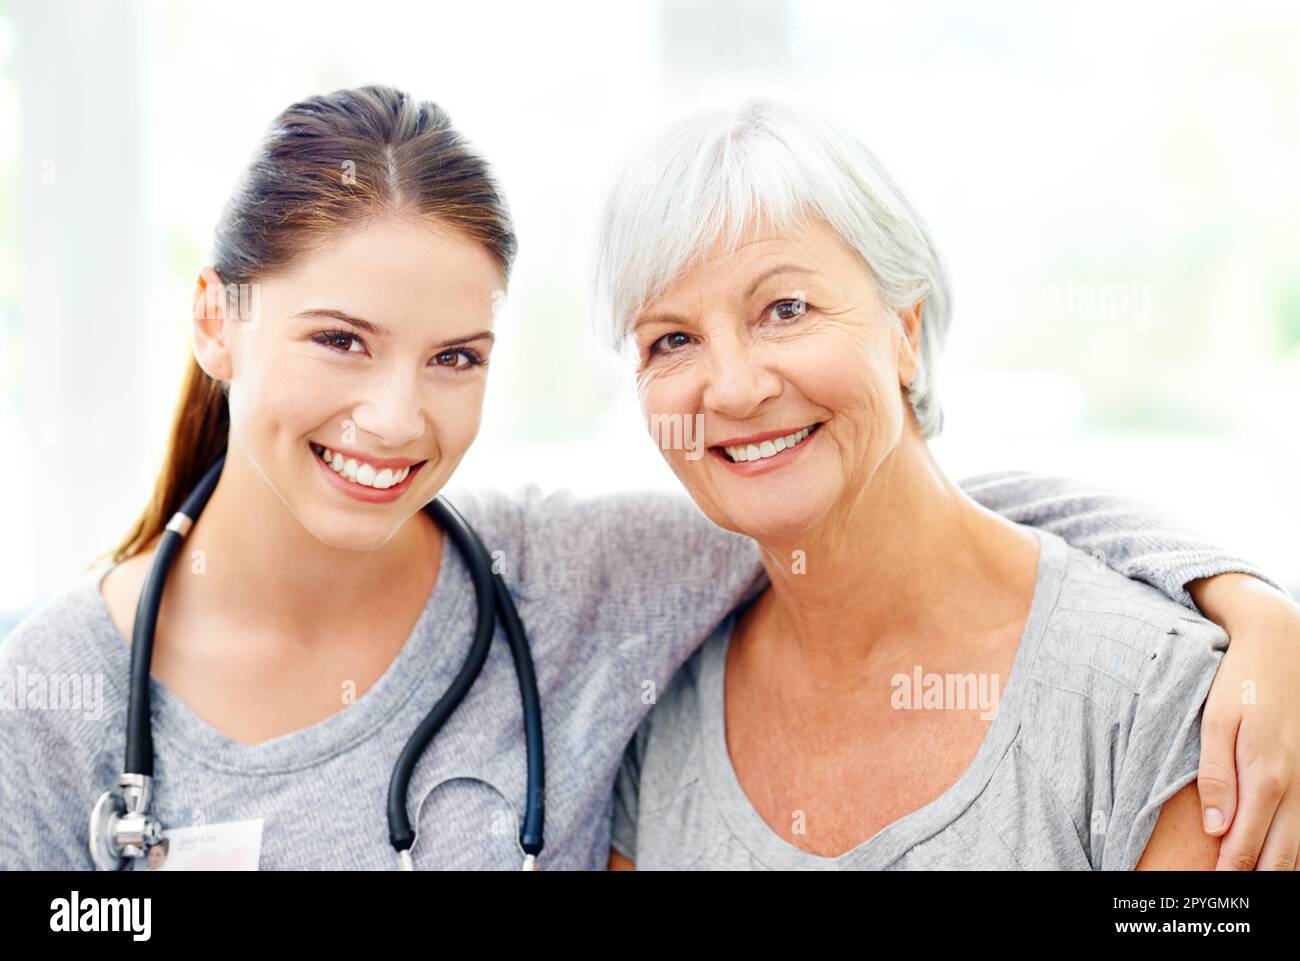 Shes a model patient. A caring healthcare practitioner with her arm around a senior patient. Stock Photo